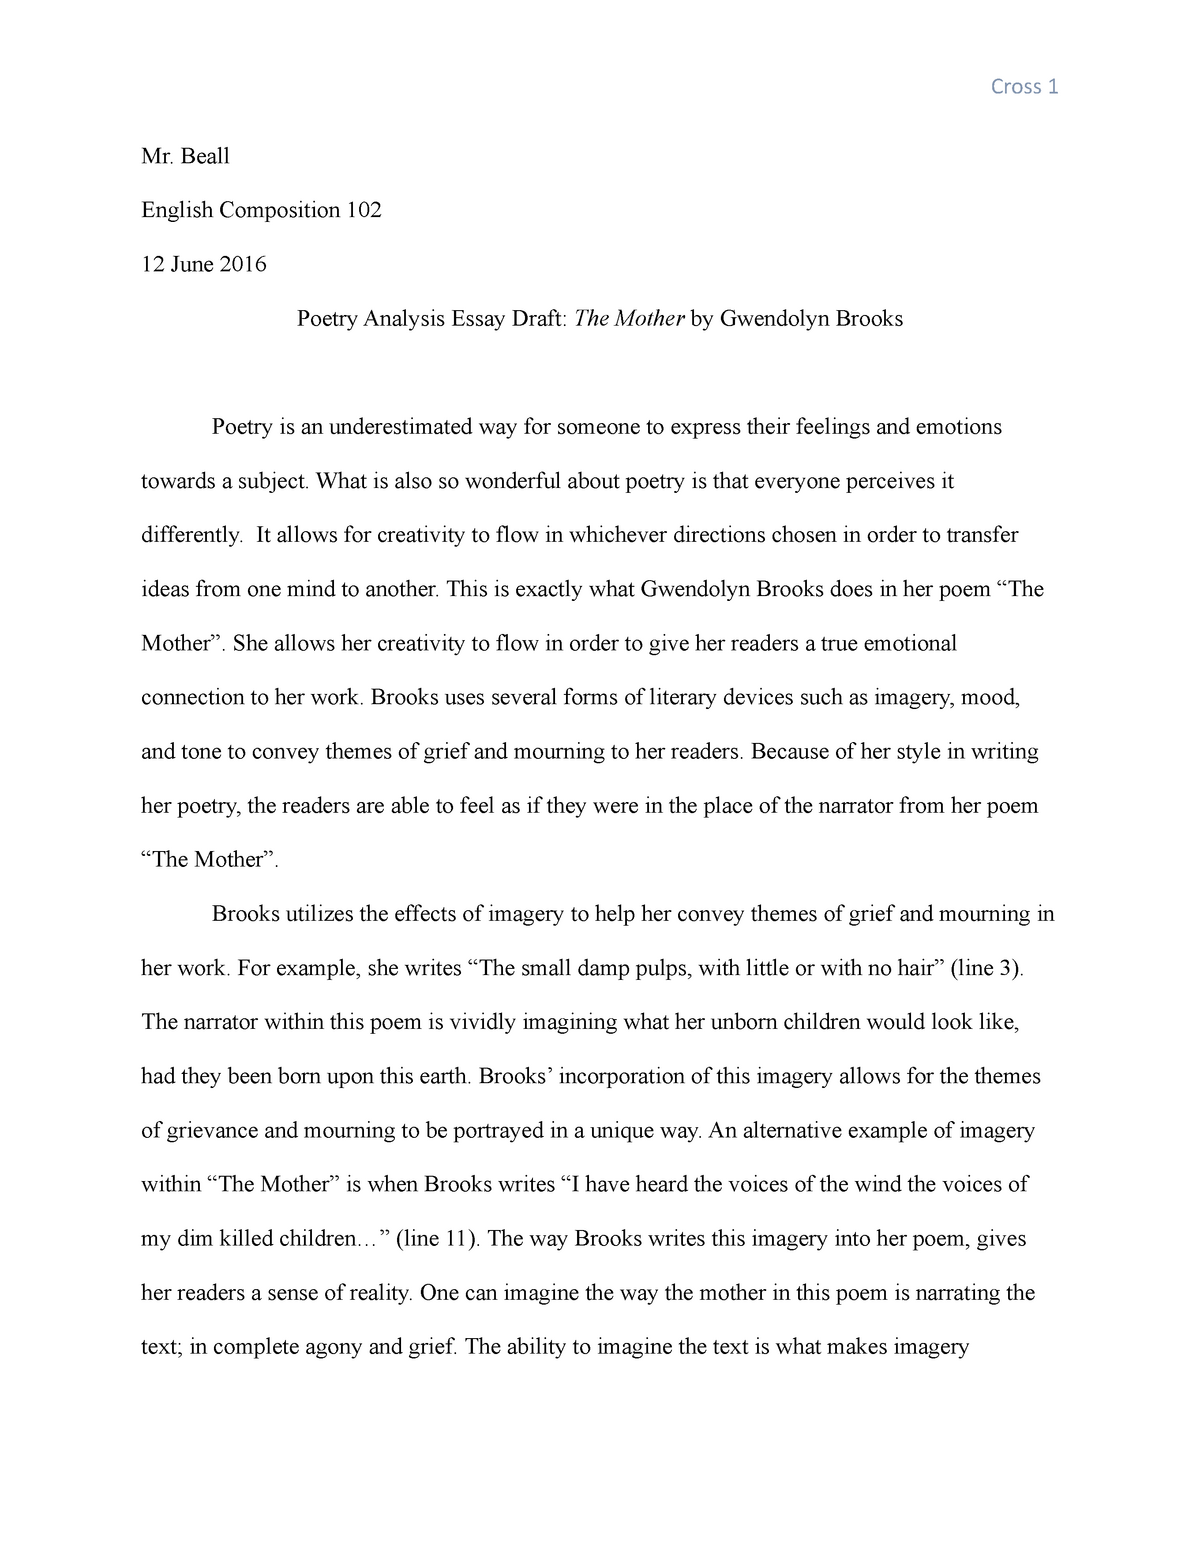 essay about poetry analysis